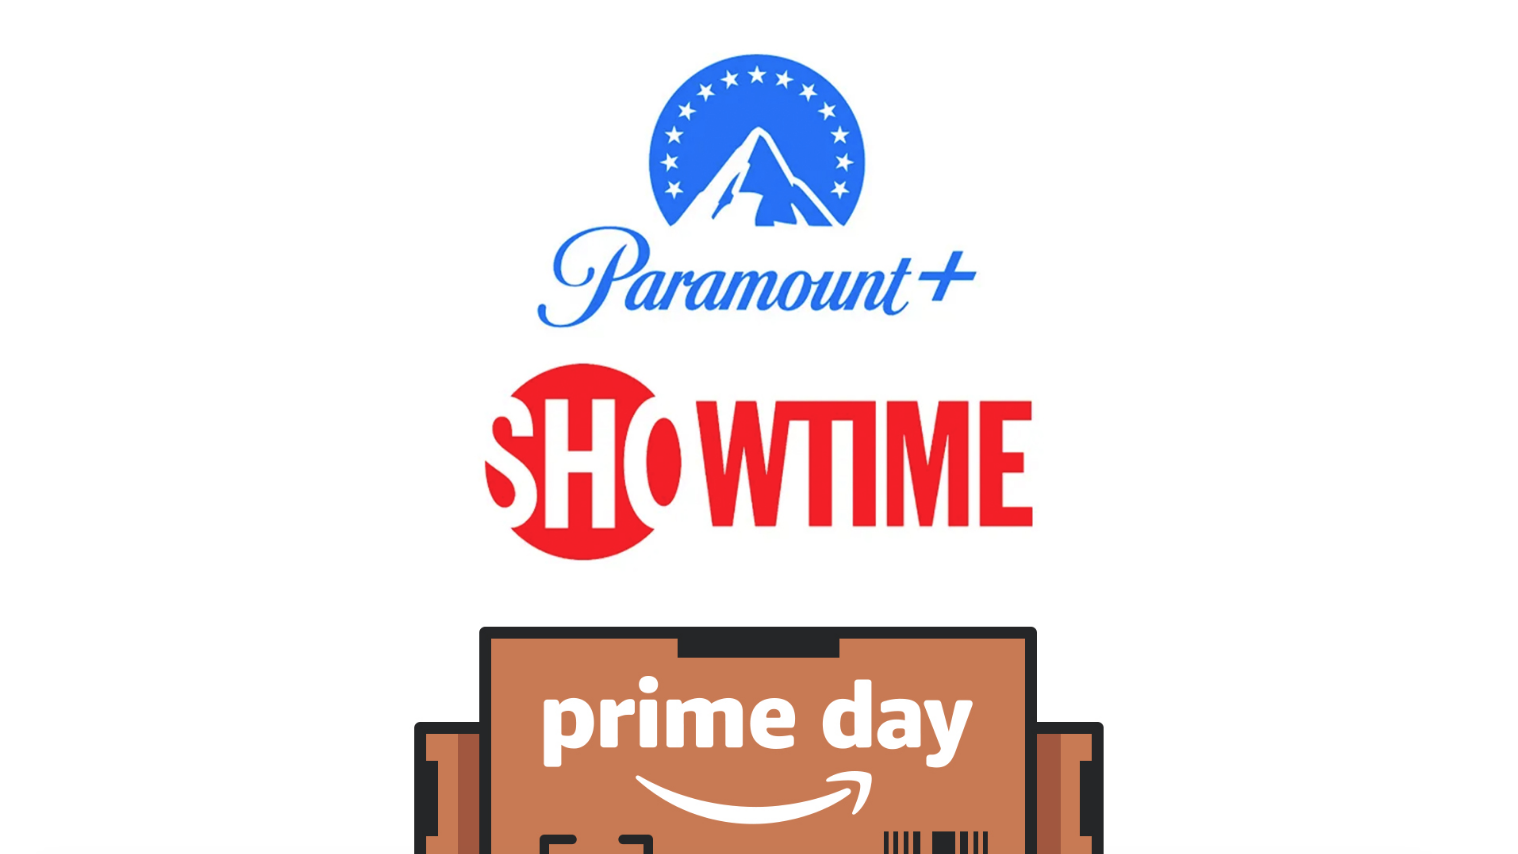 Amazon Prime members can get two months of Paramount+ with Showtime for only $12